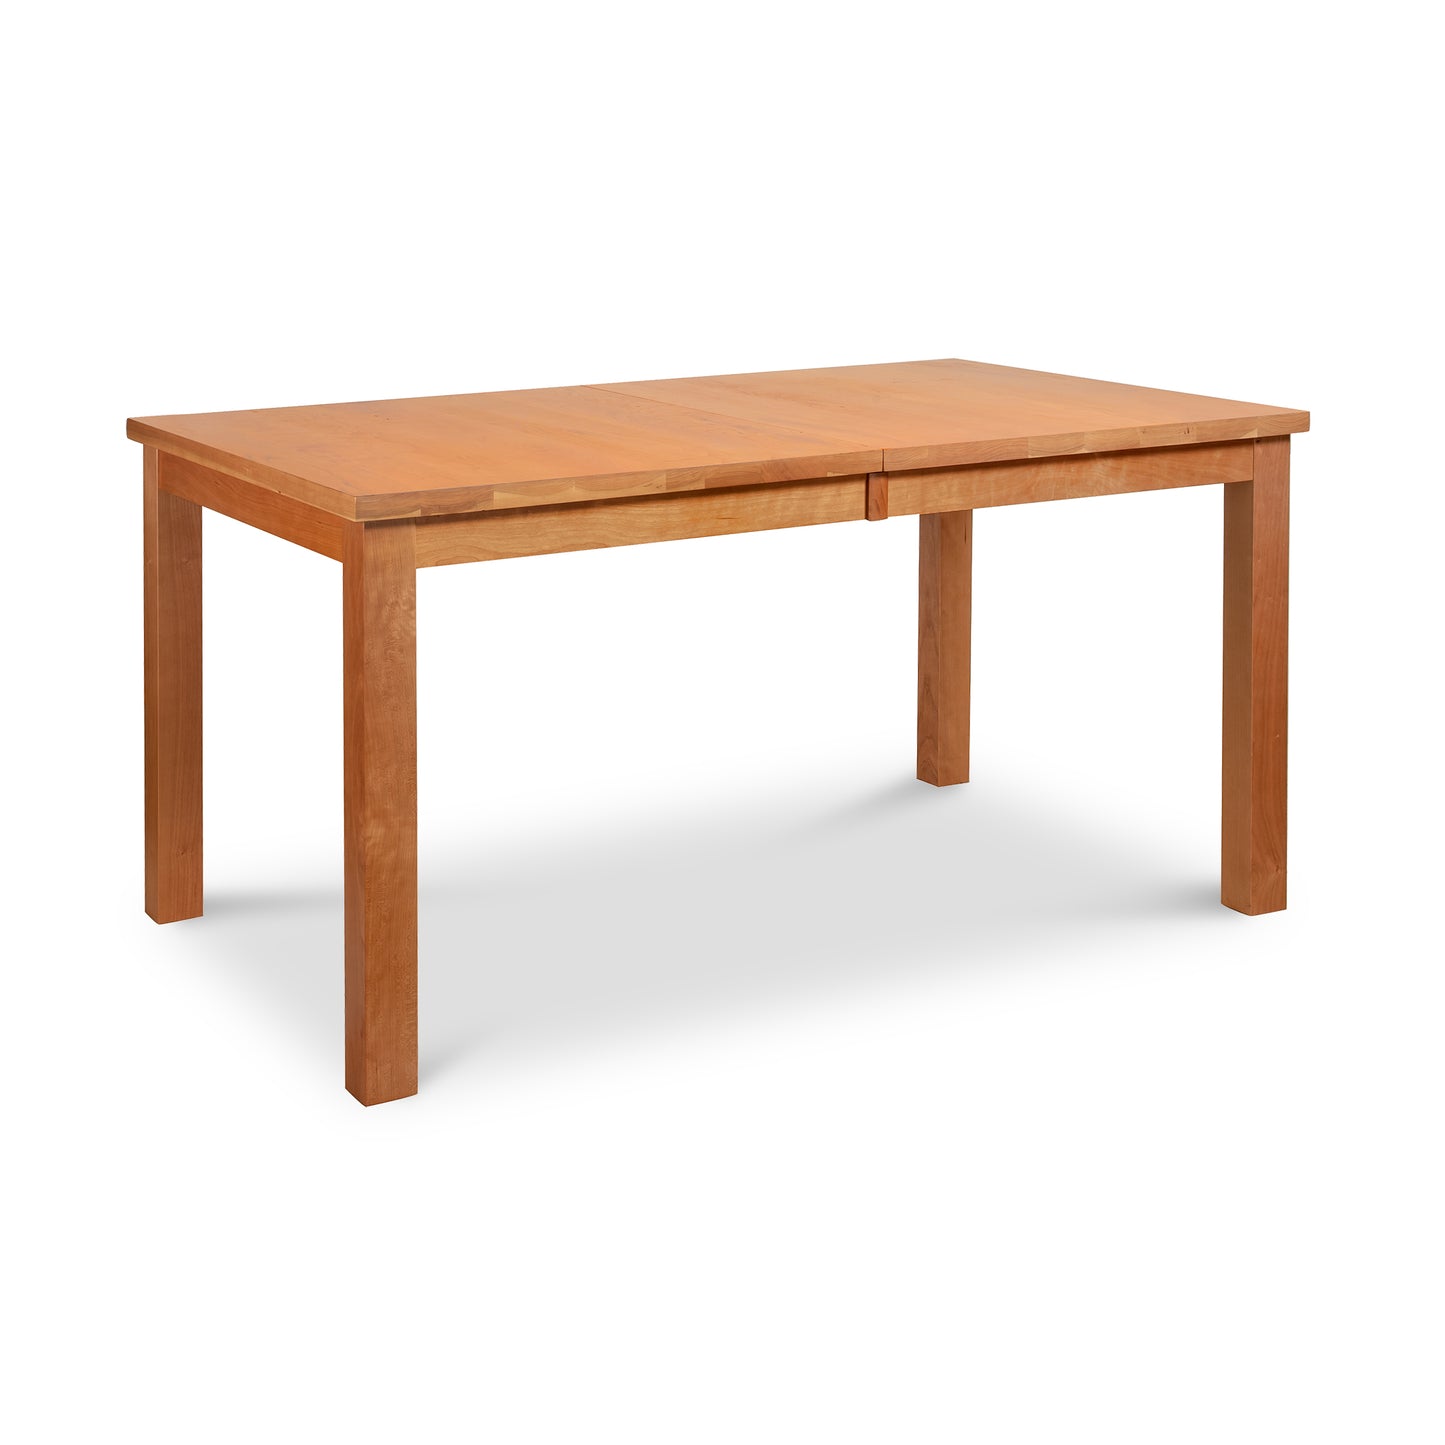 A Lyndon Furniture Modern Mission Parsons Extension Table - Floor Model made of eco-friendly Vermont wood, showcased on a white background.